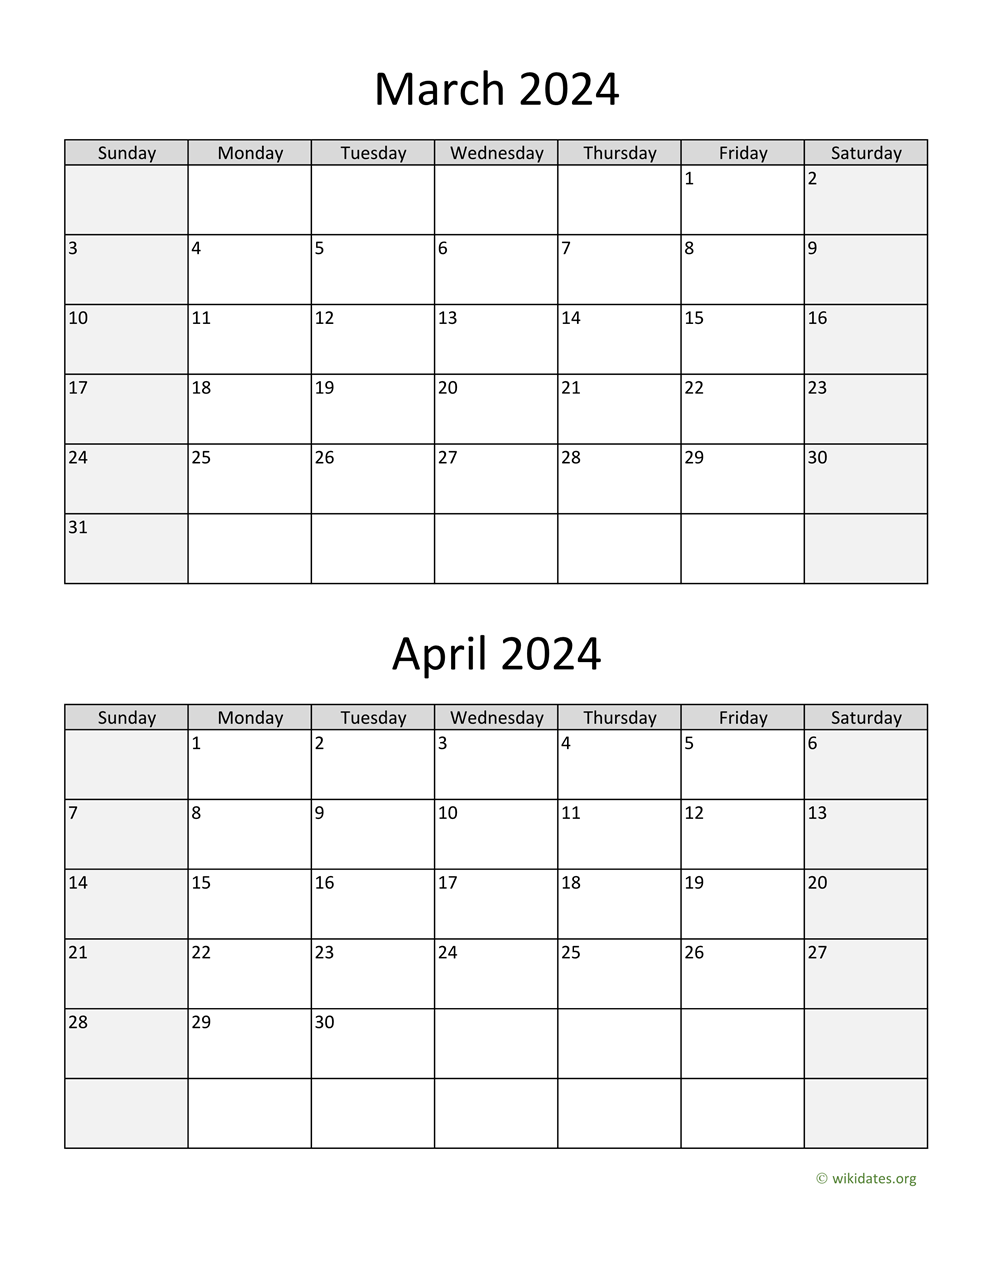 March And April 2024 Calendar | Wikidates pertaining to March To April 2024 Calendar